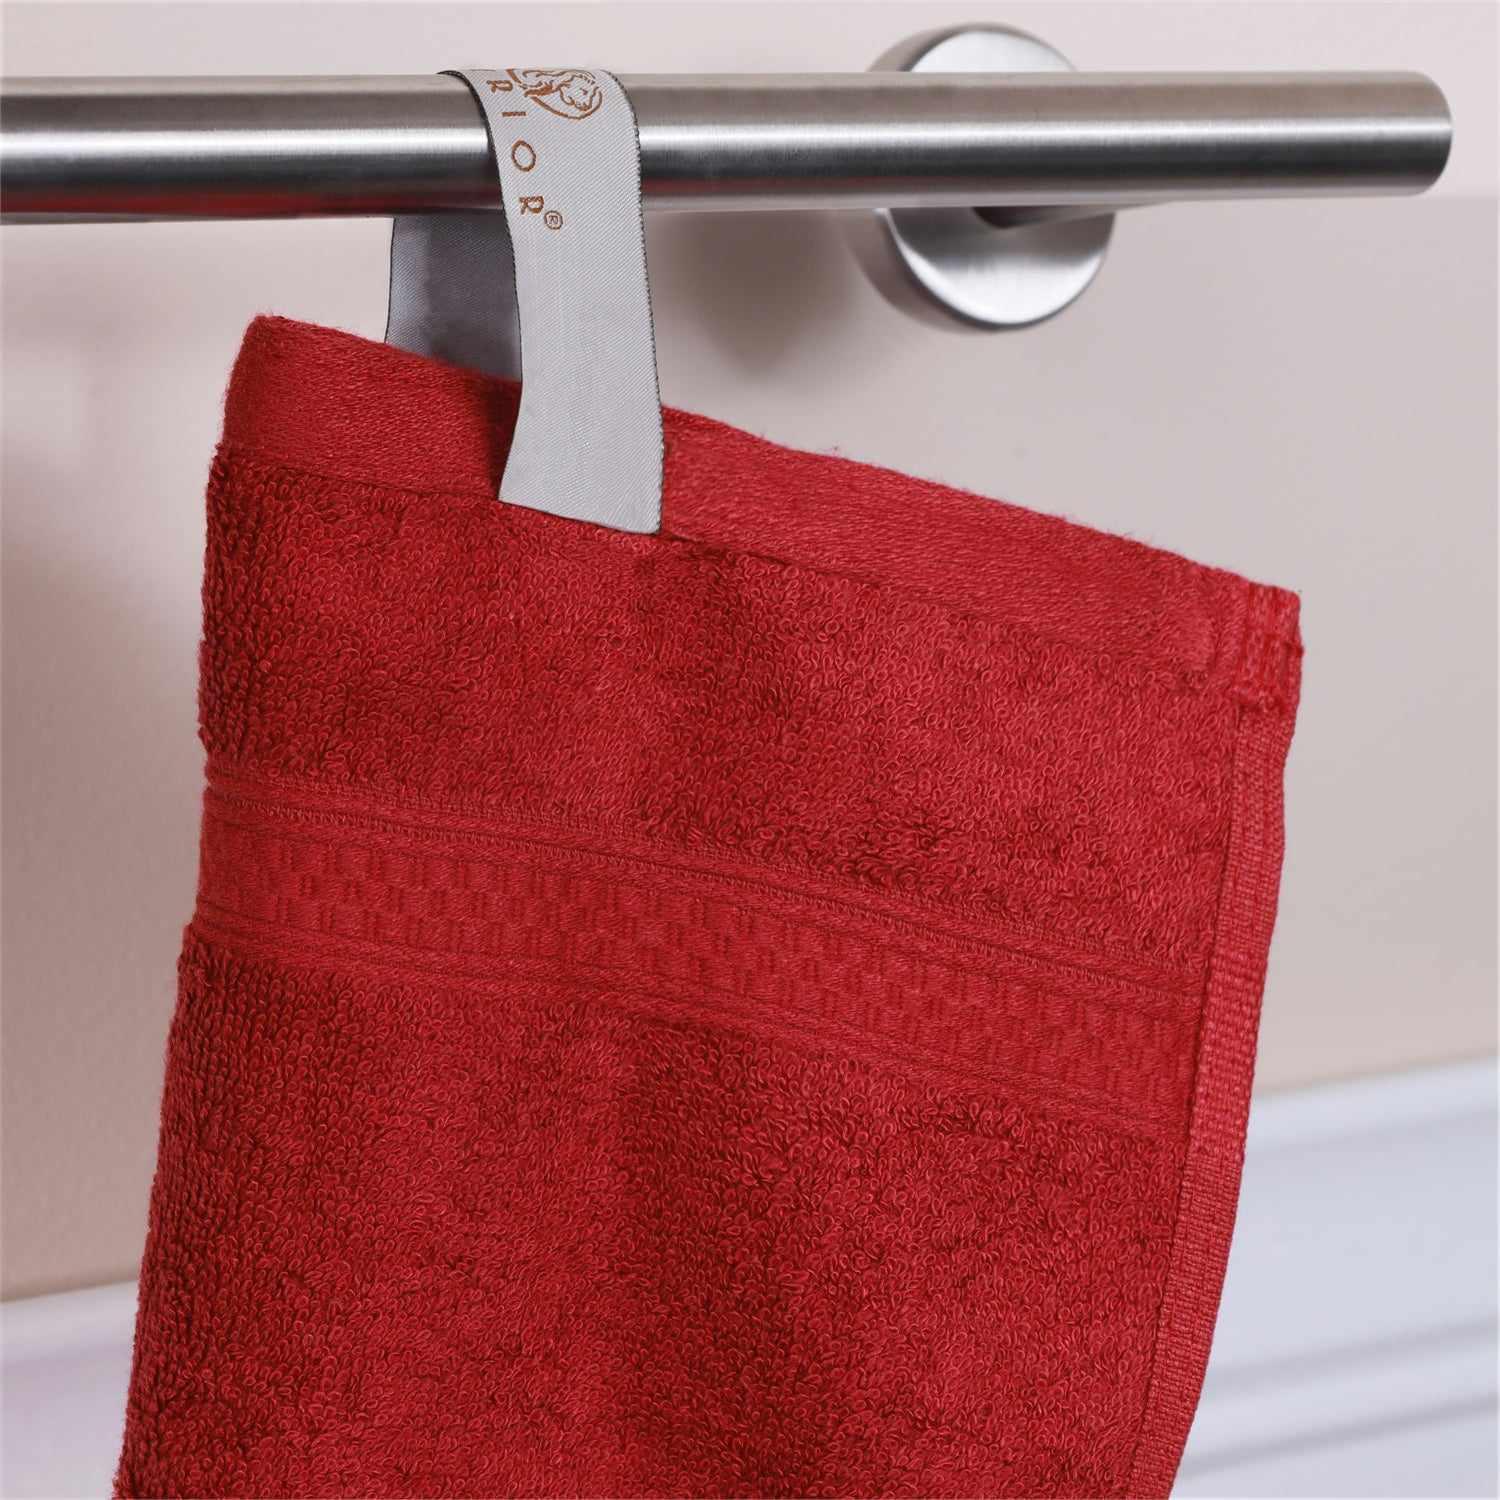  Ultra-Soft Hypoallergenic Rayon from Bamboo Cotton Blend Bath and Hand Towel Set -  Crimson